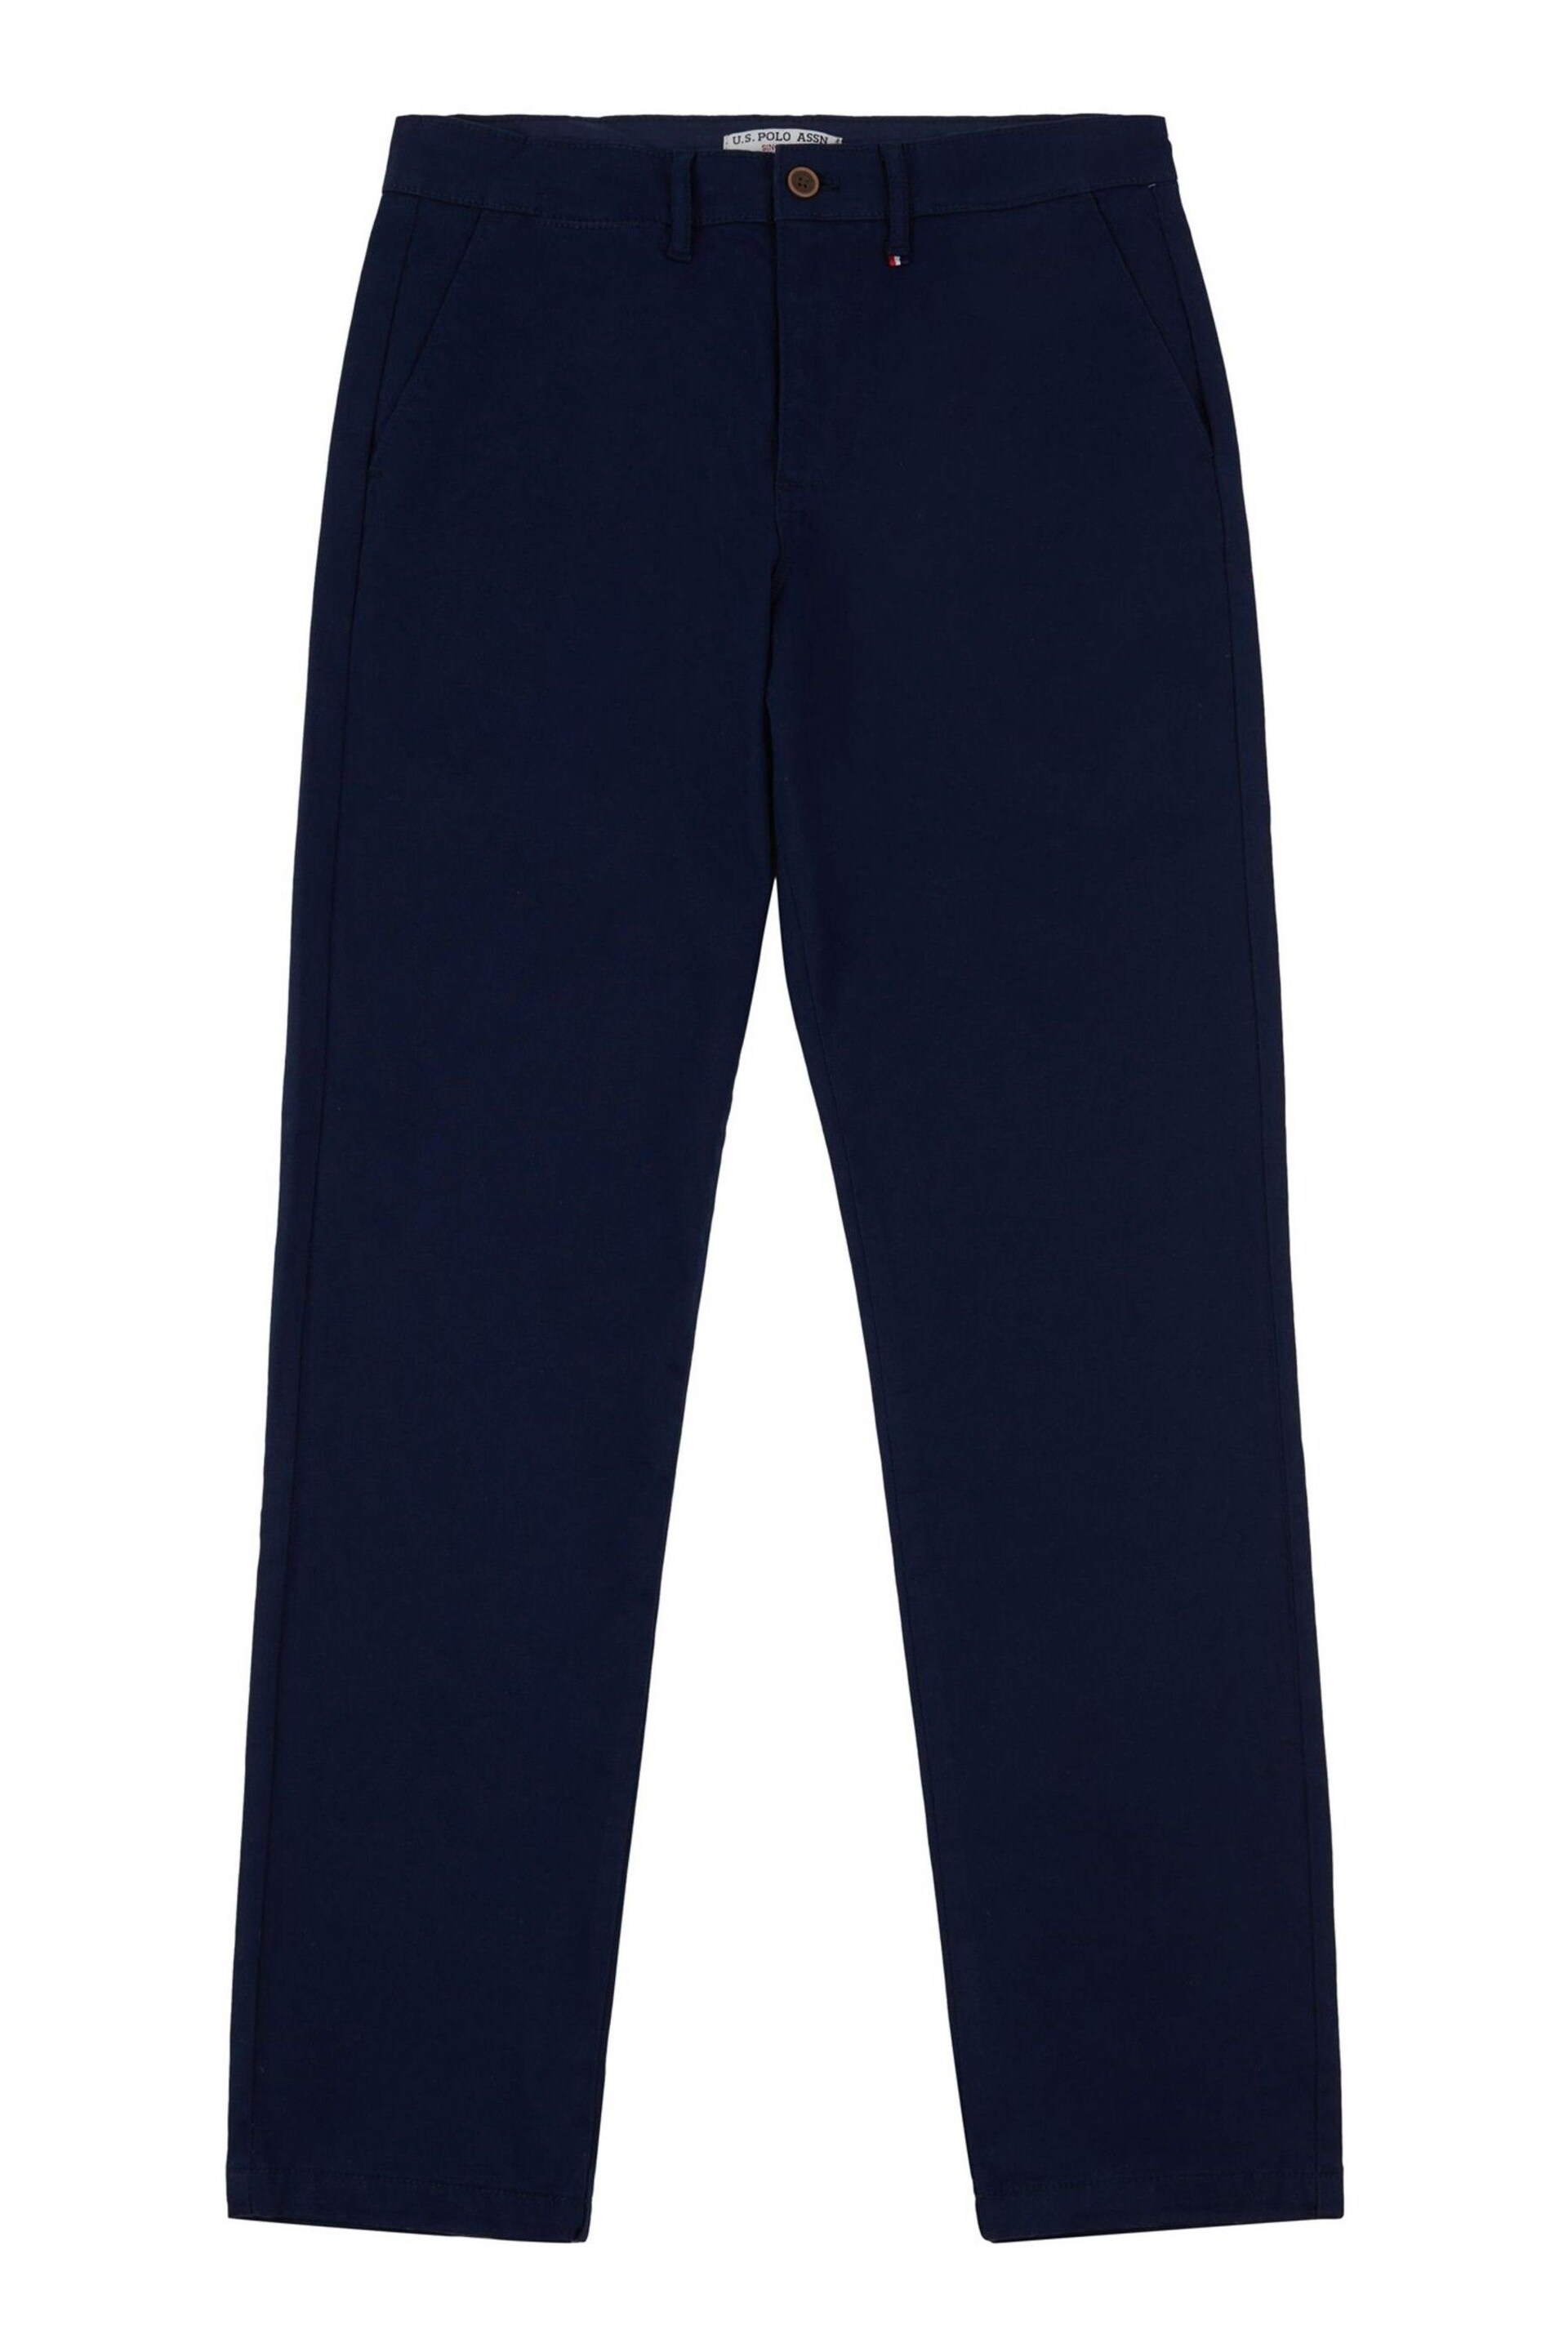 U.S. Polo Assn. Heritage Chinos - Image 4 of 5